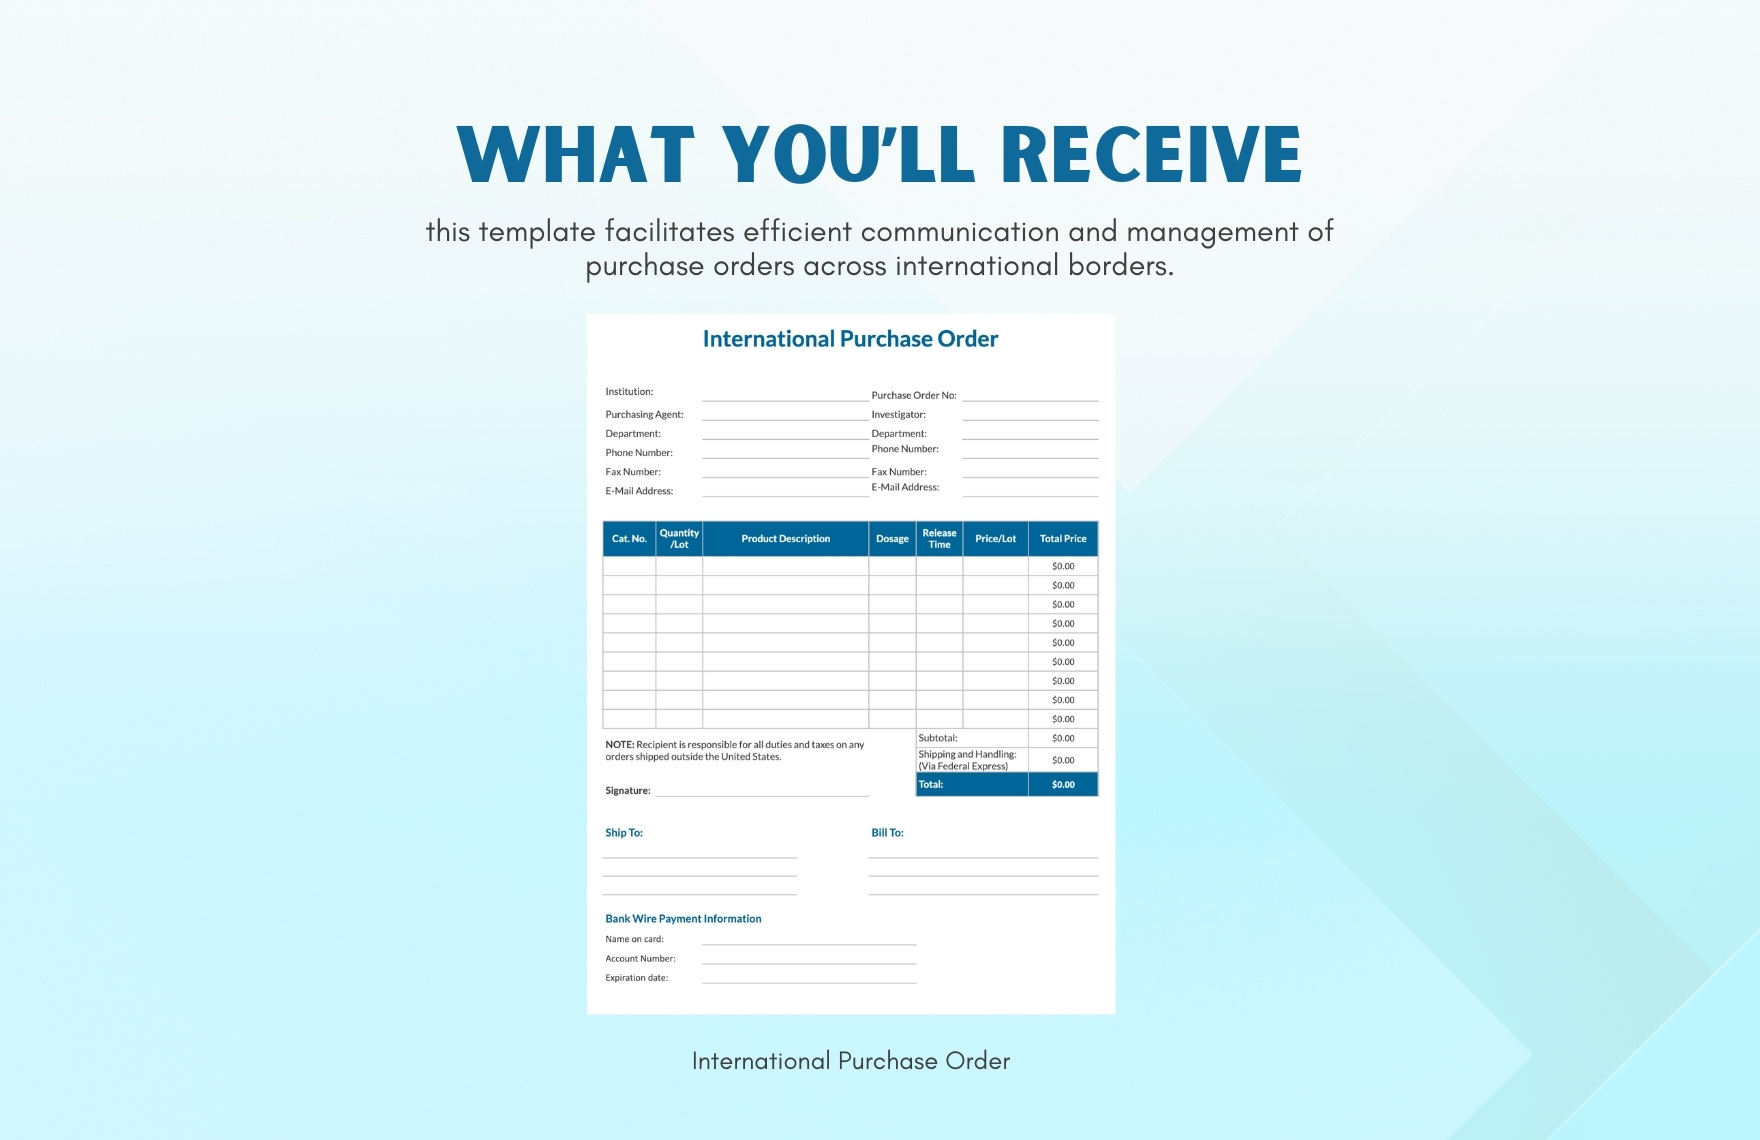 International Purchase Order Template